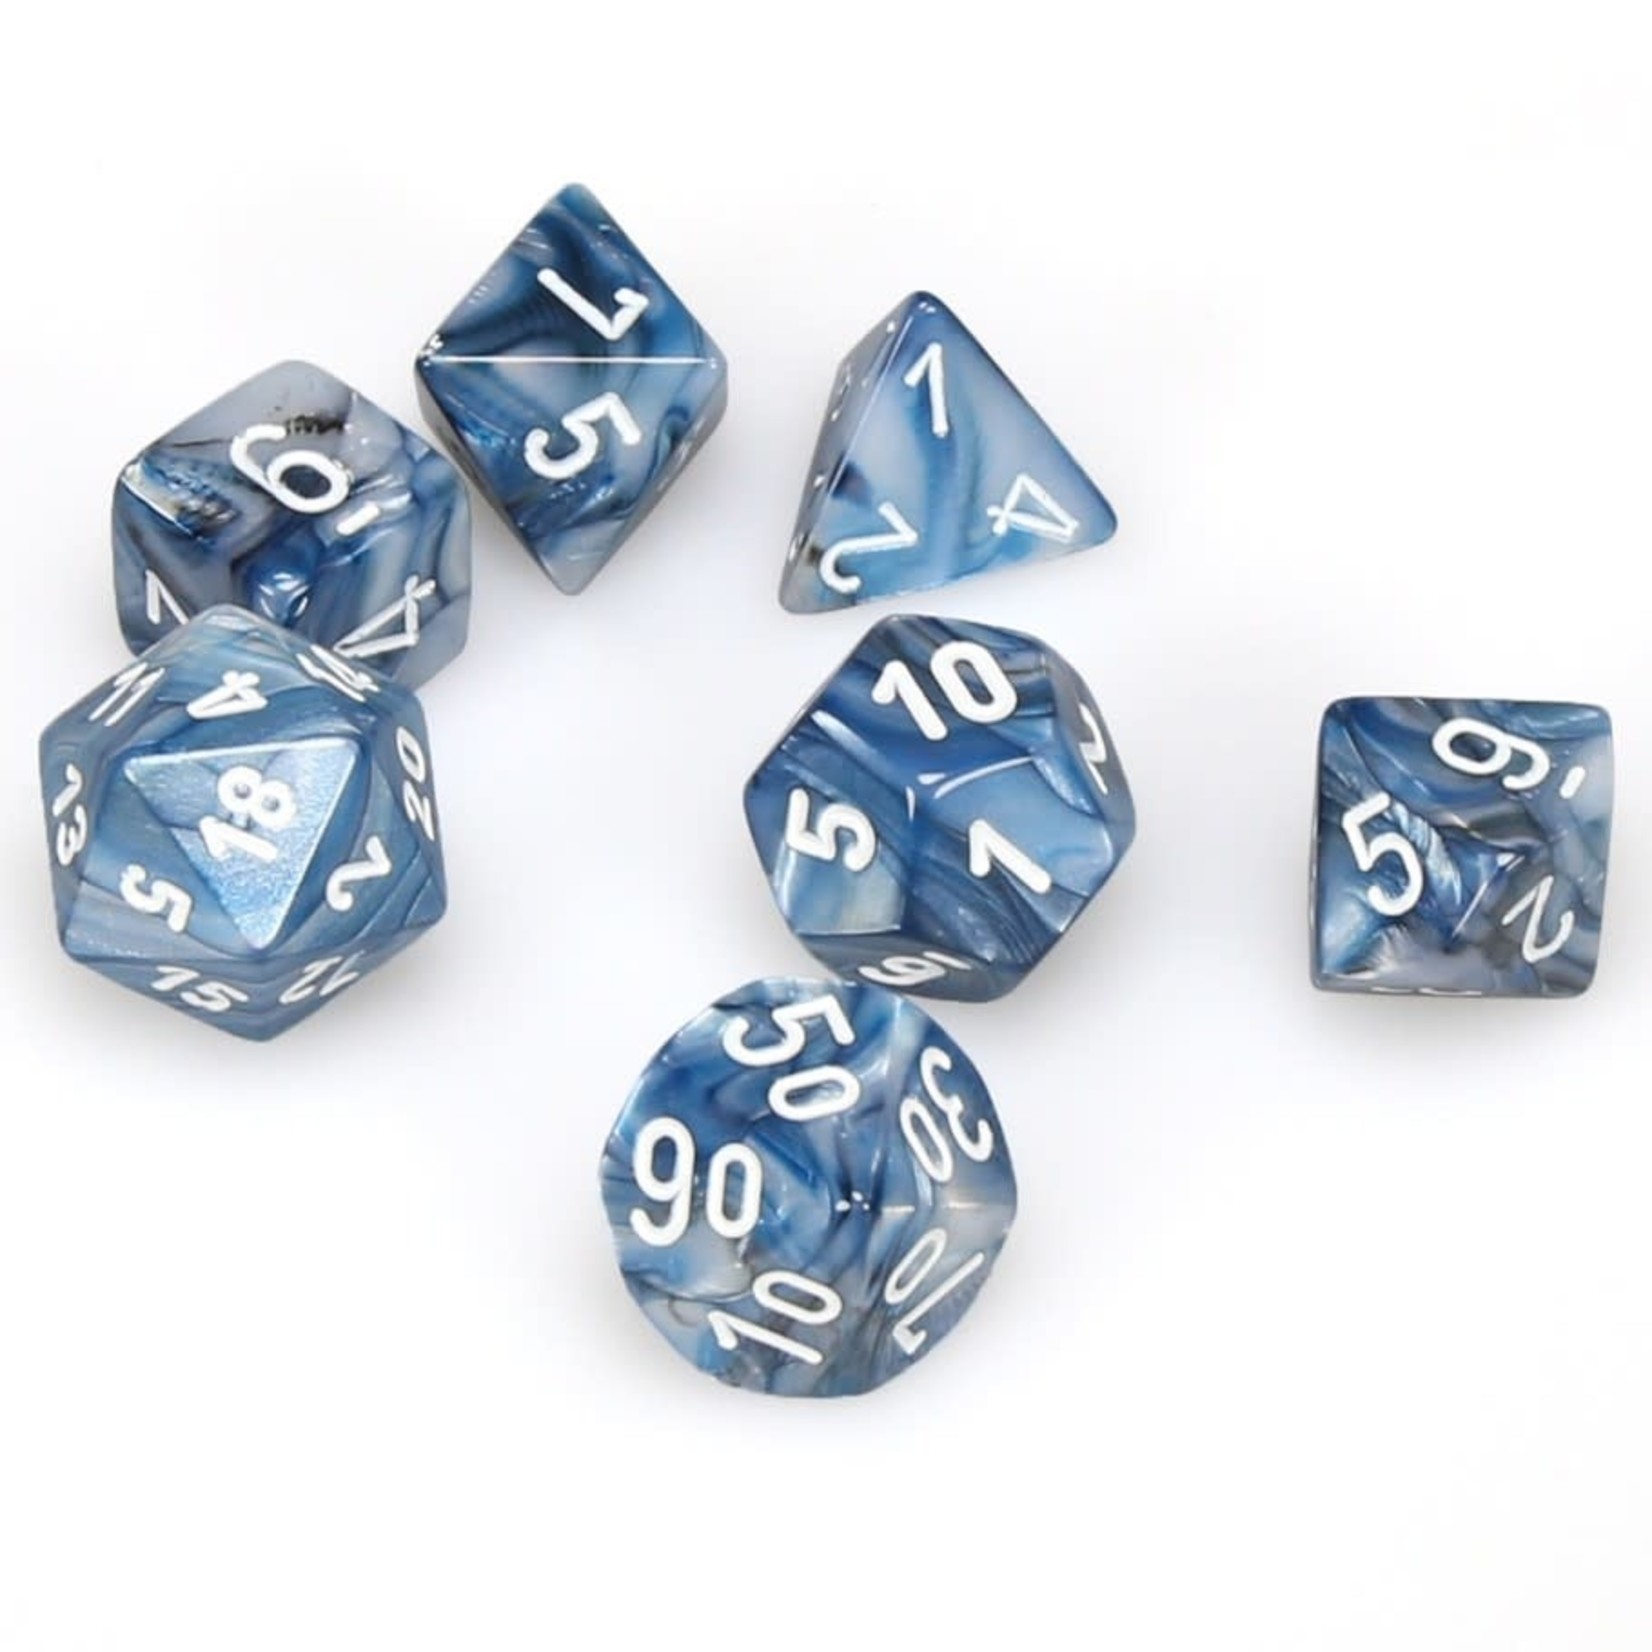 Chessex Chessex Lustrous Slate with White Polyhedral 7 die set